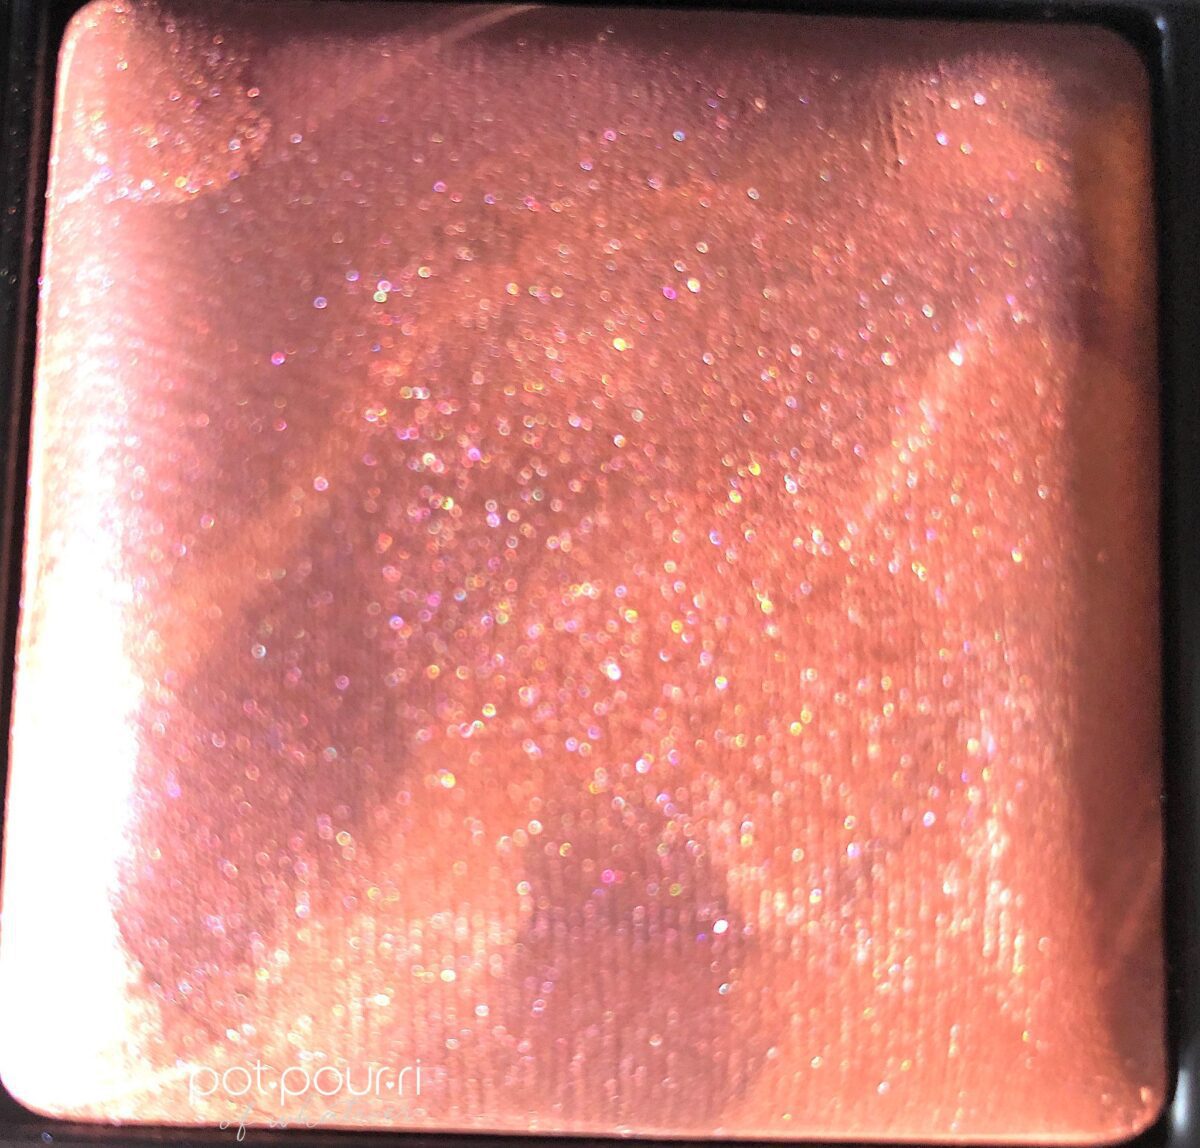 RISQUE IS A MARBLED HIGHLIGHTING POWDER